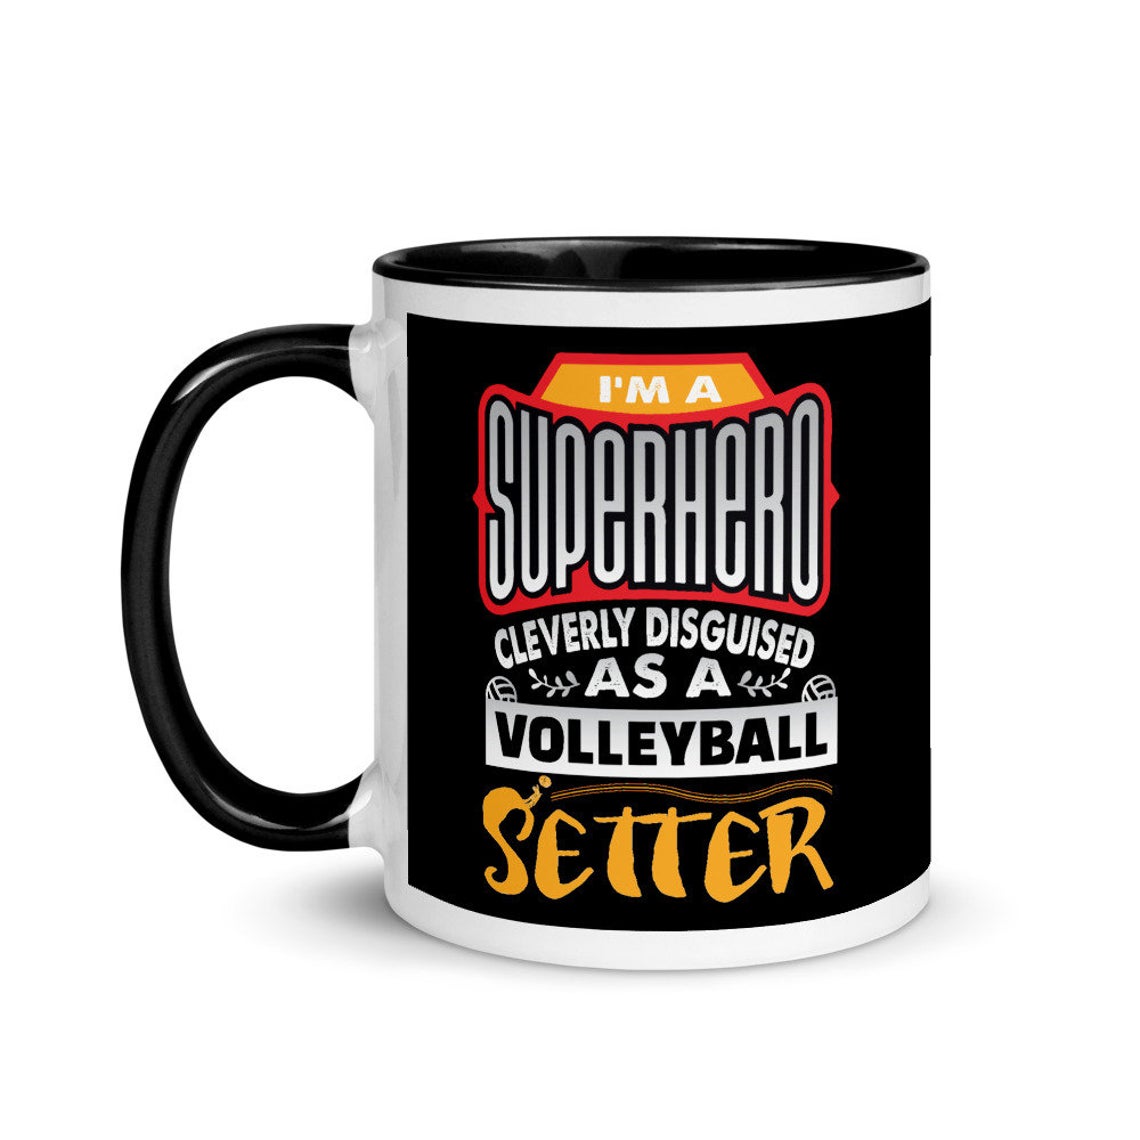 My Volleybragswag volleyball mug collection includes mugs for hitters, liberos, blockers and coaches as well as the VBS Beast Collection featuring animal players.